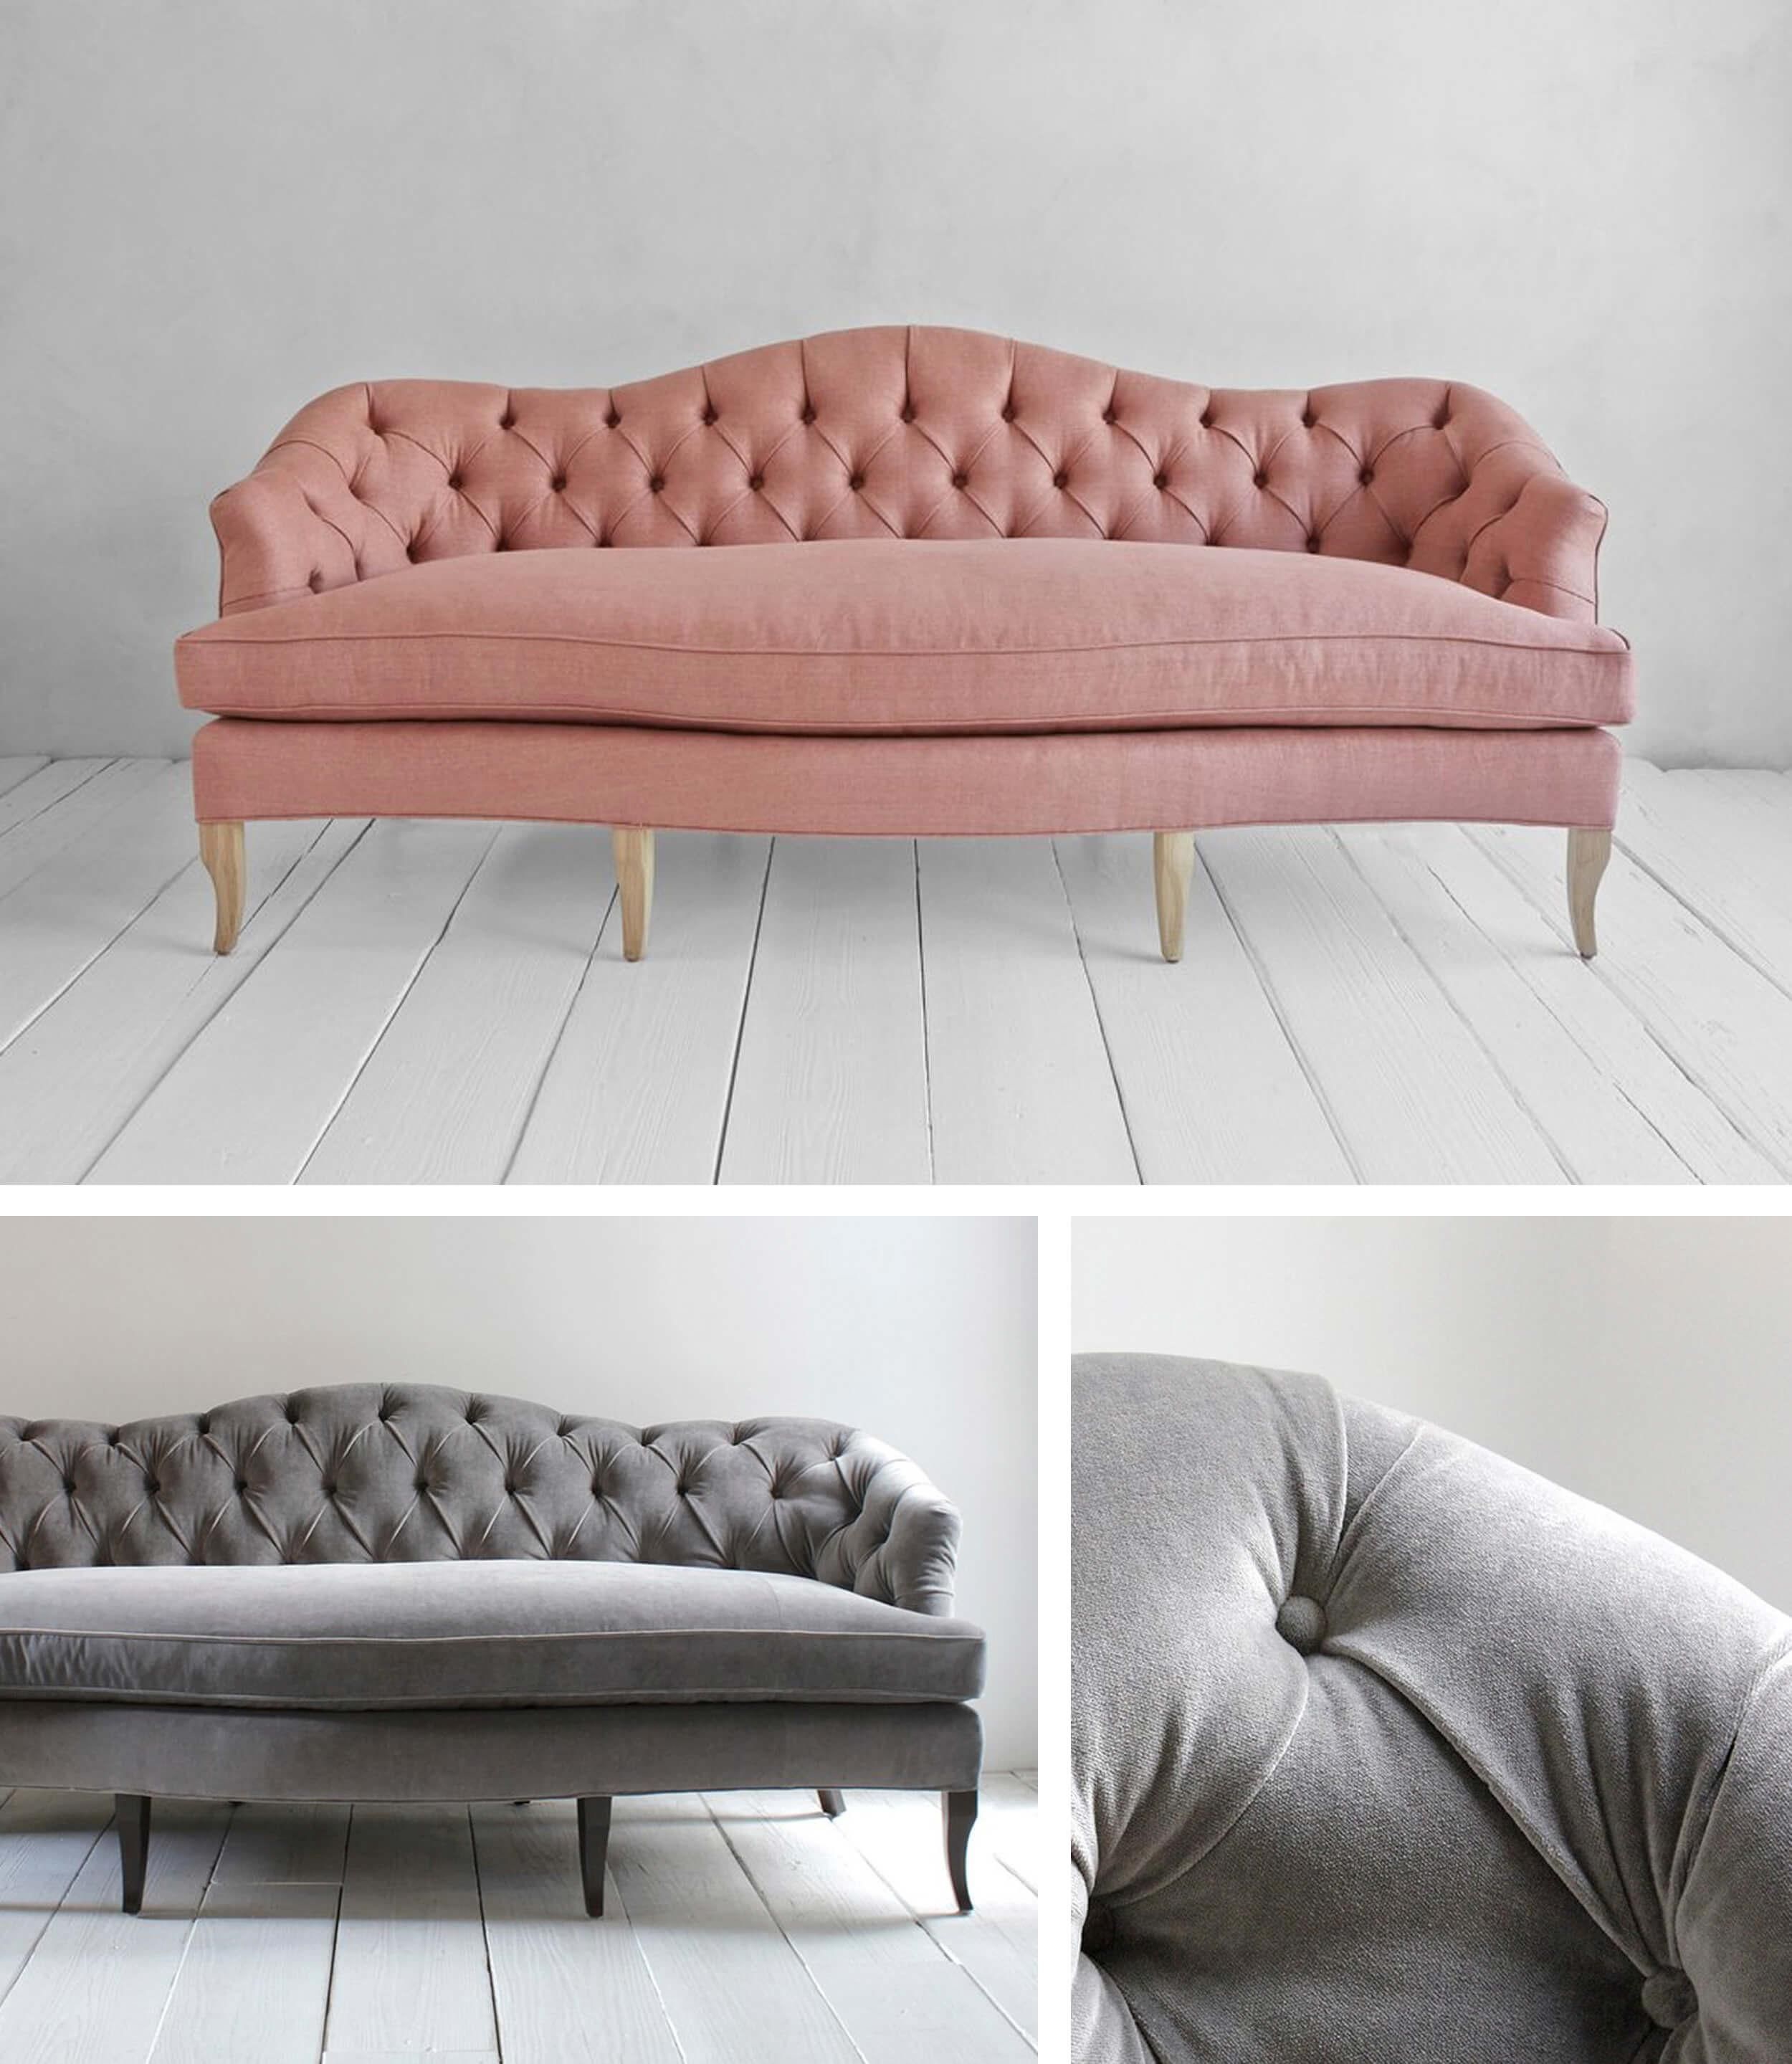 Furniture I Am Coveting For The New House – Emily Henderson Intended For Affordable Tufted Sofa (View 8 of 20)